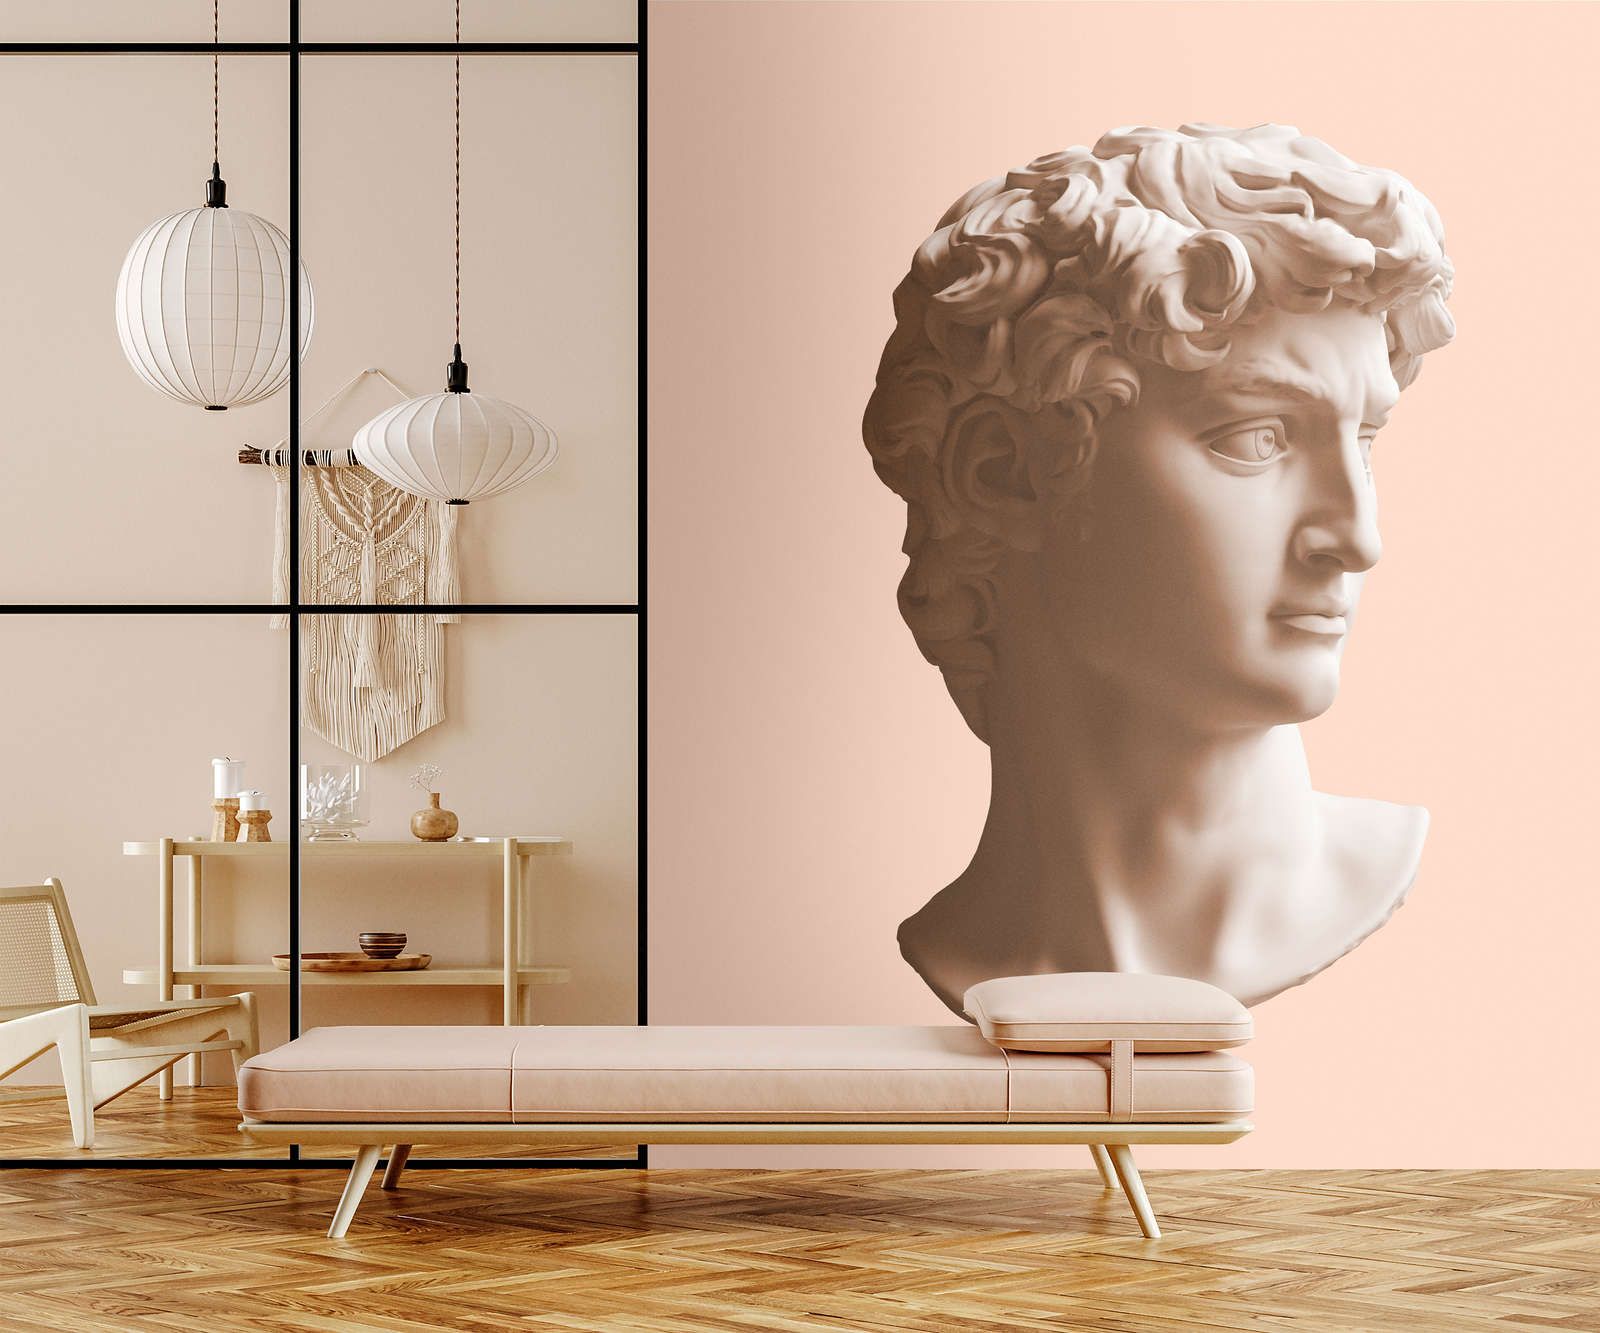             Photo wallpaper »mars« - antique male bust - Smooth, slightly shiny premium non-woven fabric
        